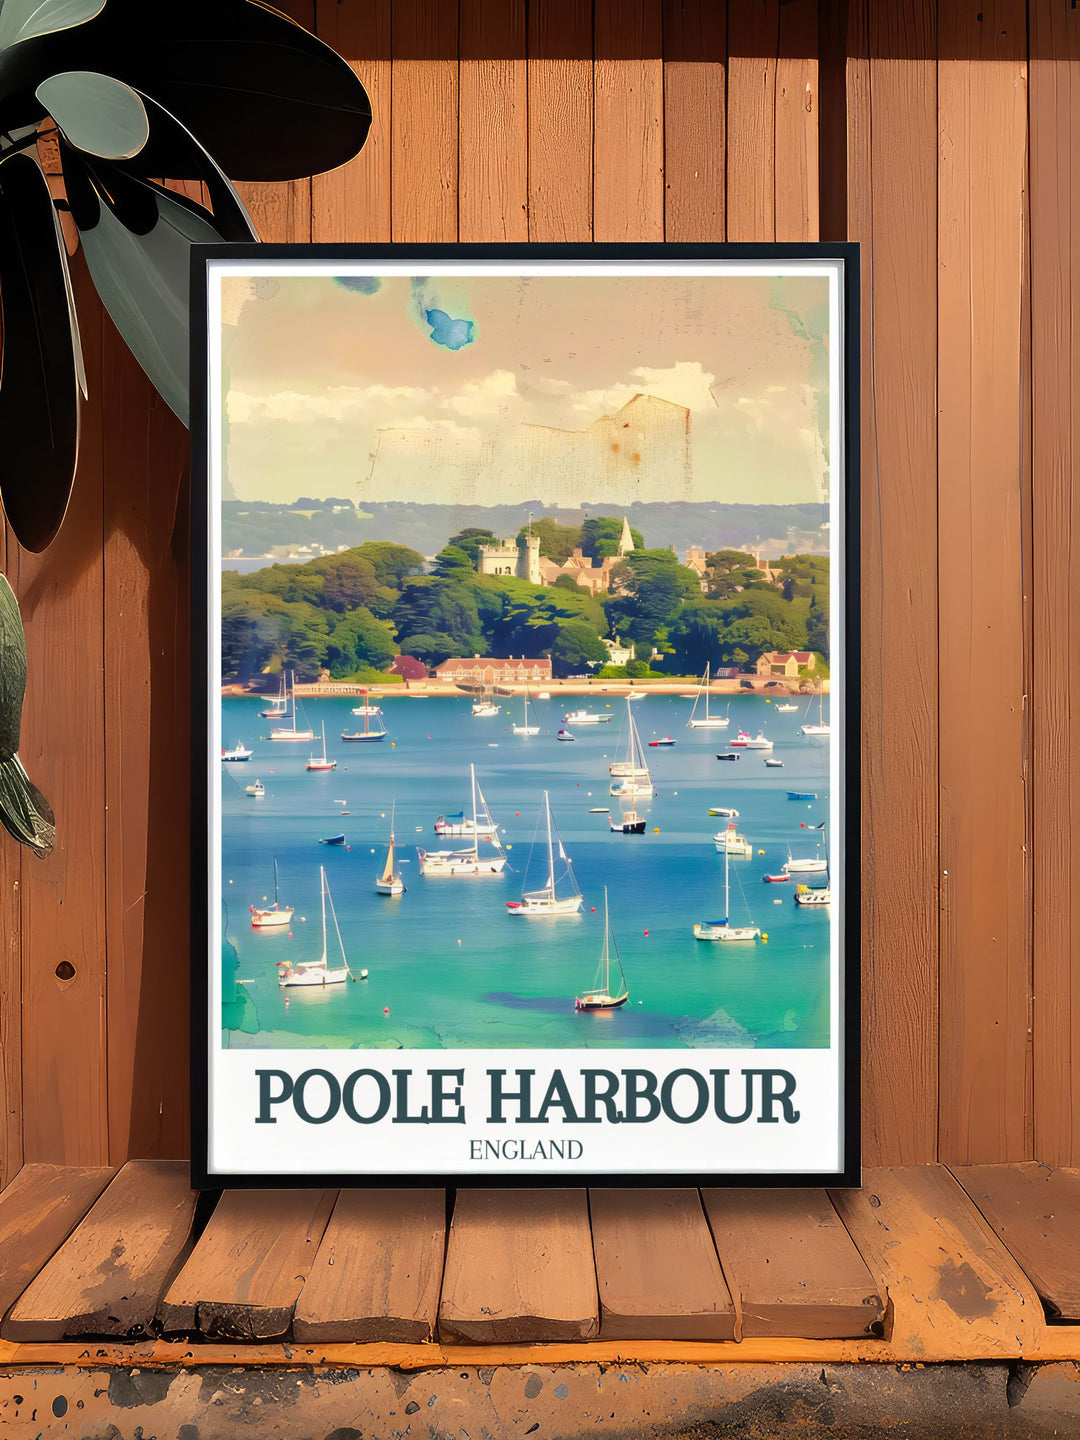 Stunning travel poster of Poole Harbour with Brownsea Island and Sandbanks Beach an exquisite piece of England wall decor ideal for birthdays anniversaries or as a thoughtful present for travel and art lovers